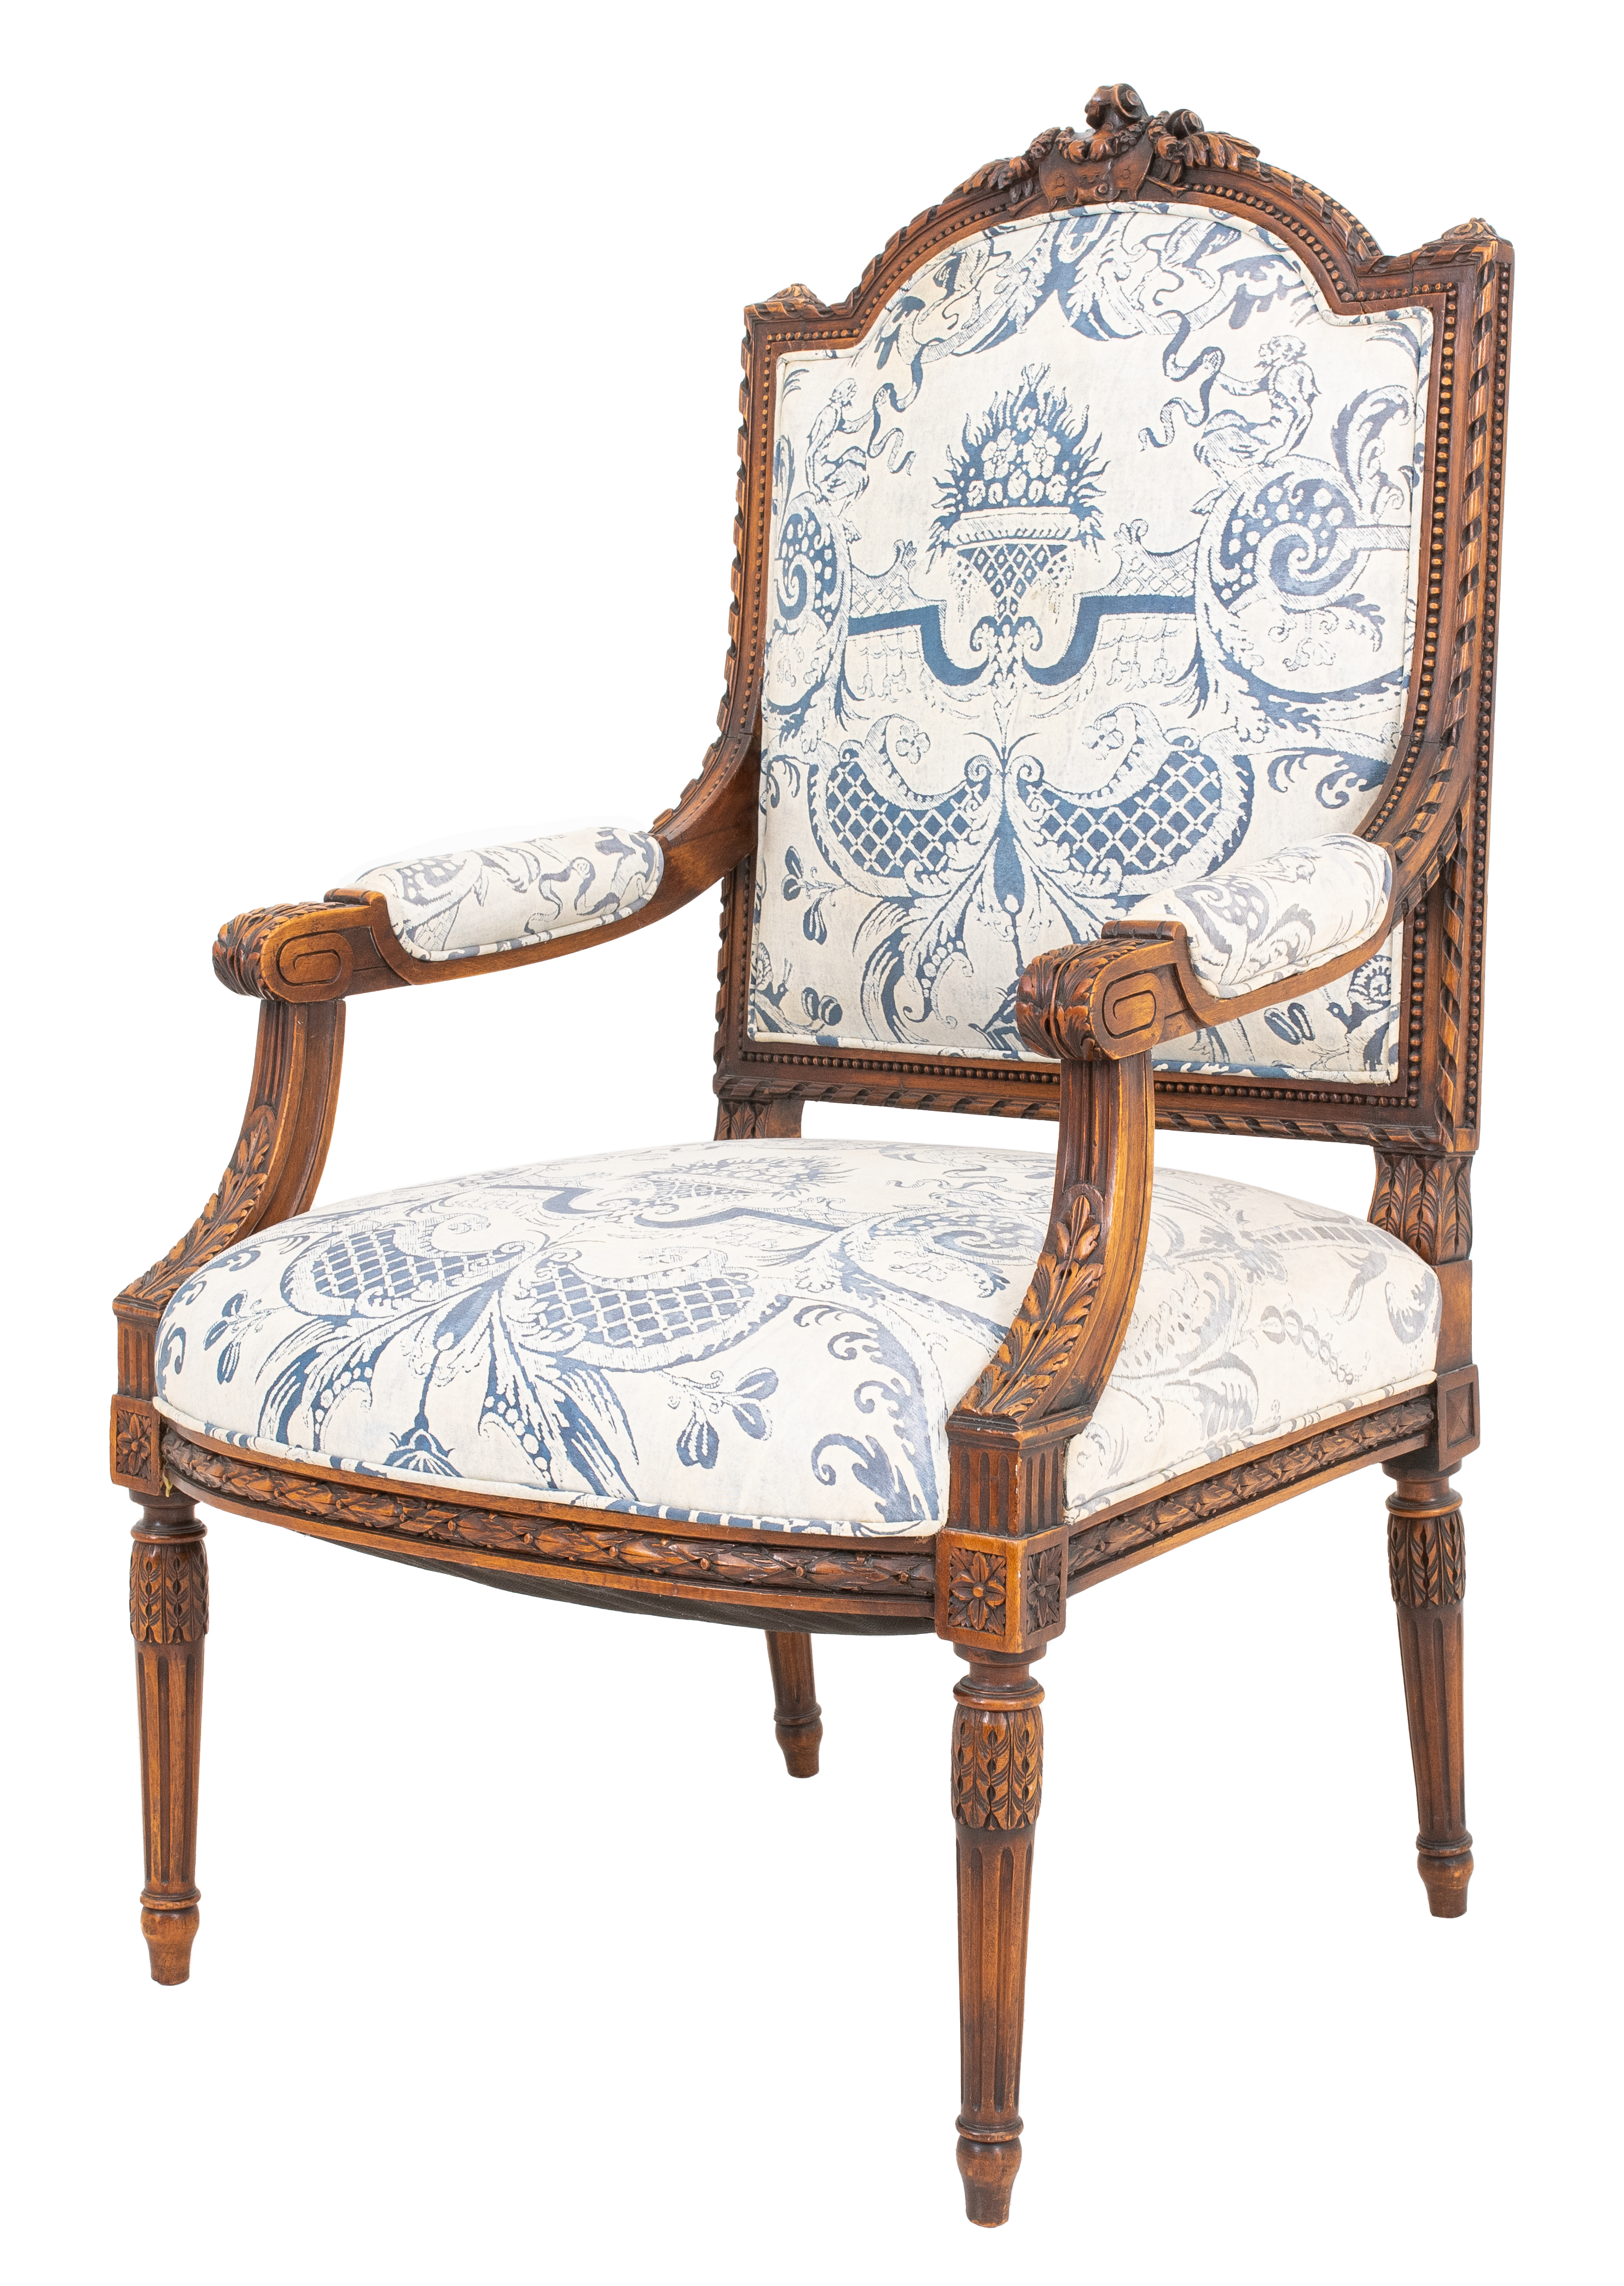 LOUIS XVI STYLE UPHOLSTERED CARVED